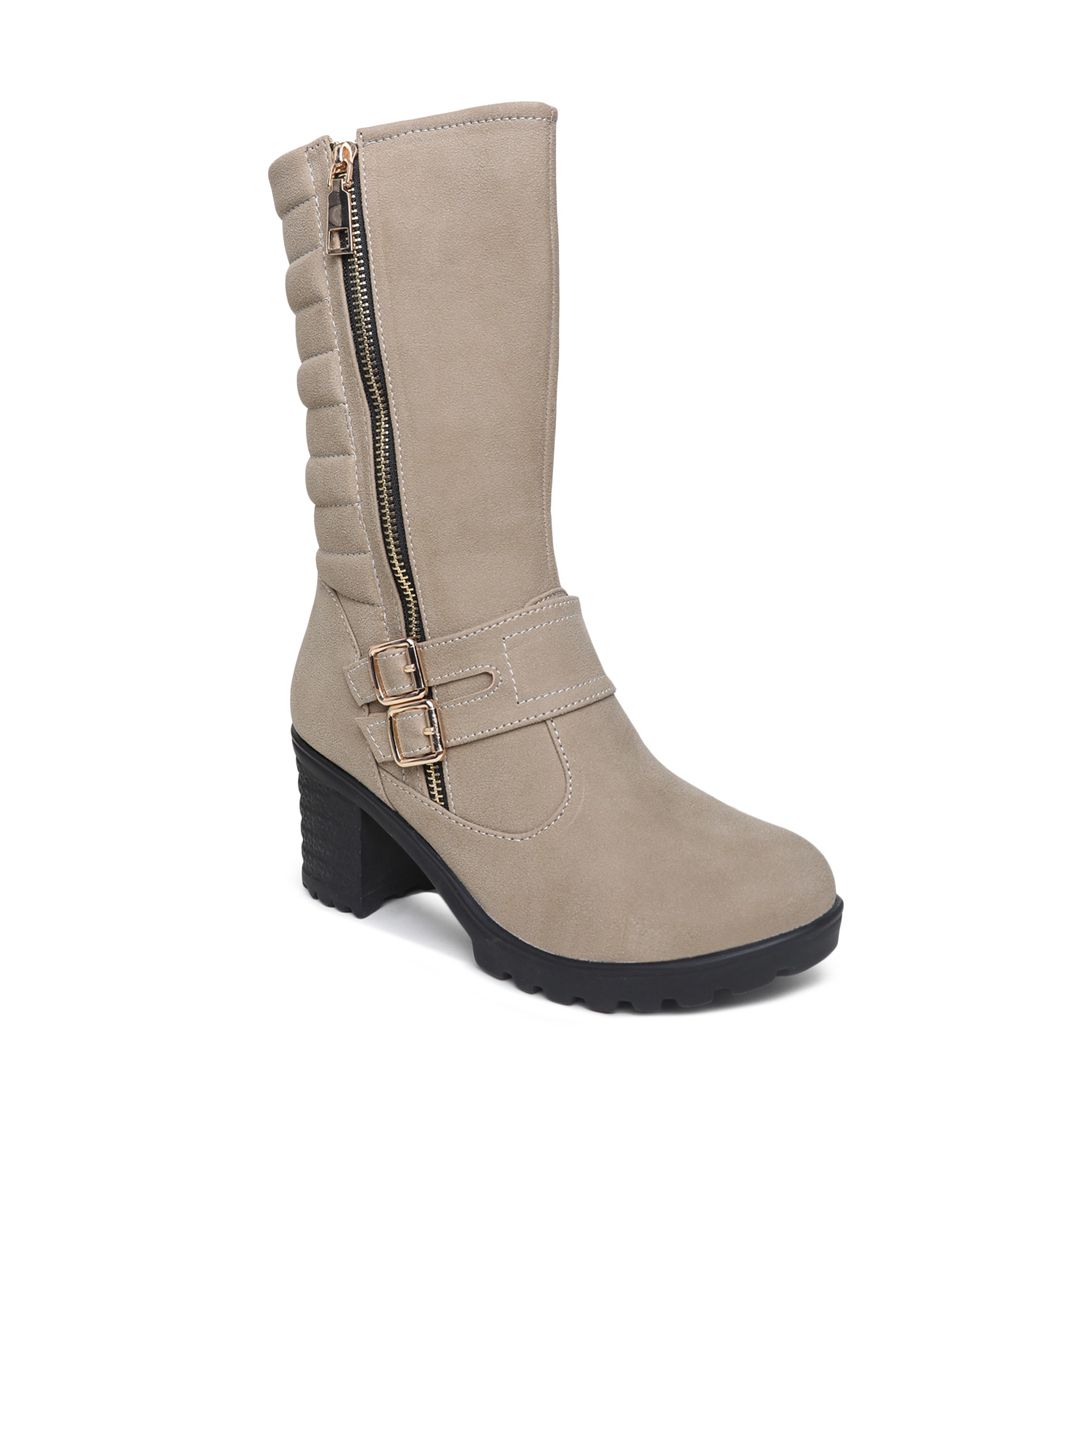 VALIOSAA Women Cream-Colored High-Top Heeled Boots Price in India